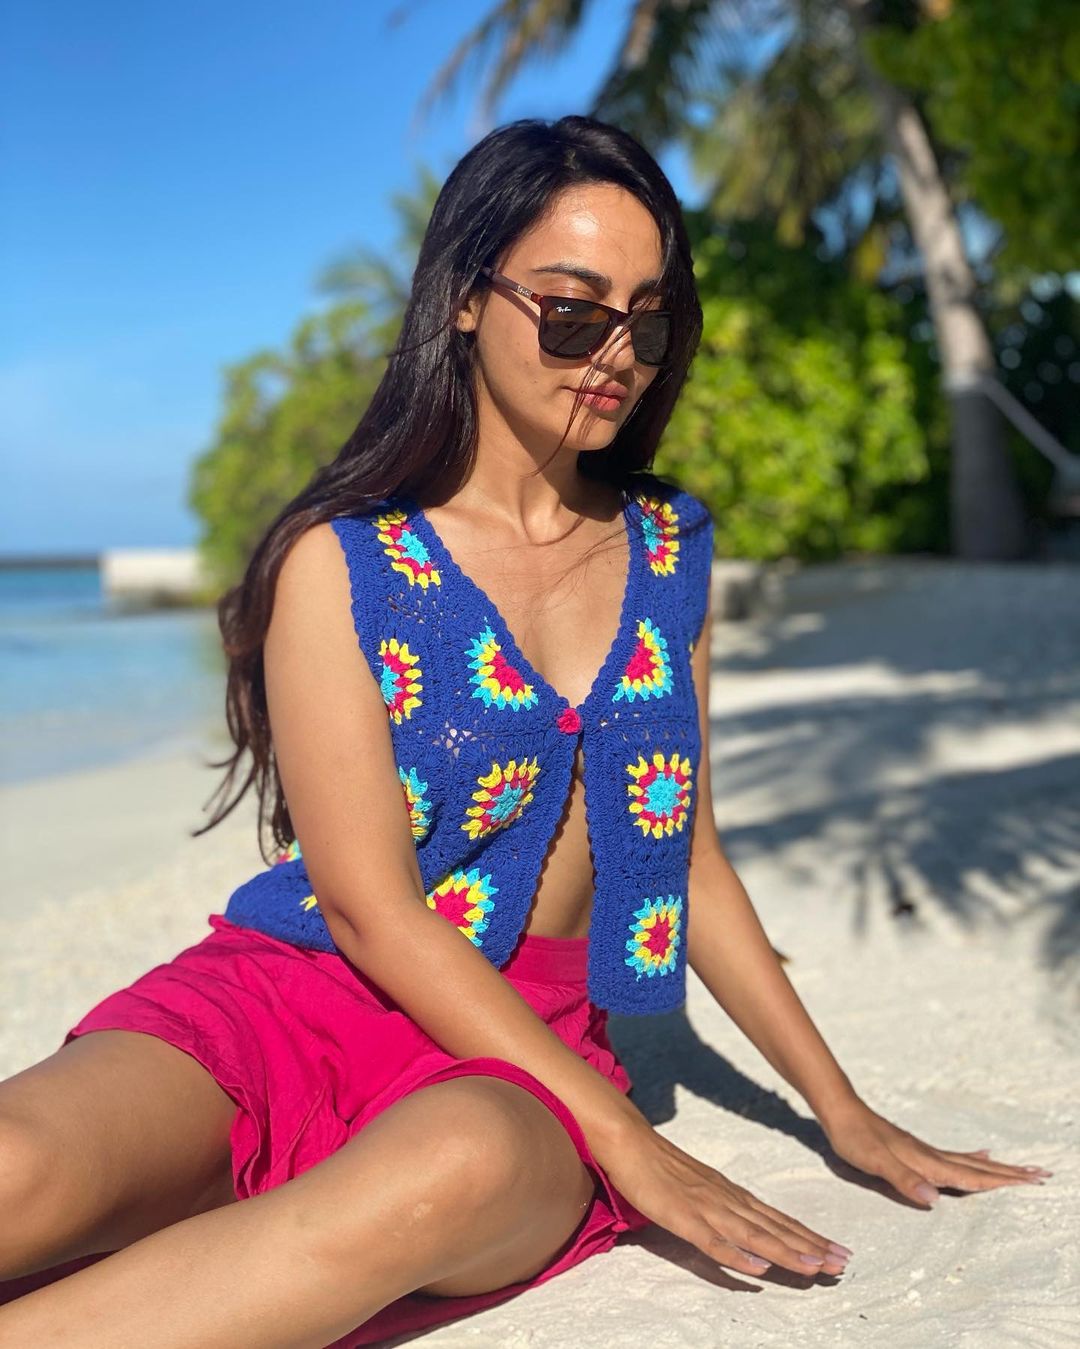 Surbhi Jyoti looks pretty in the crochet top and pink shorts